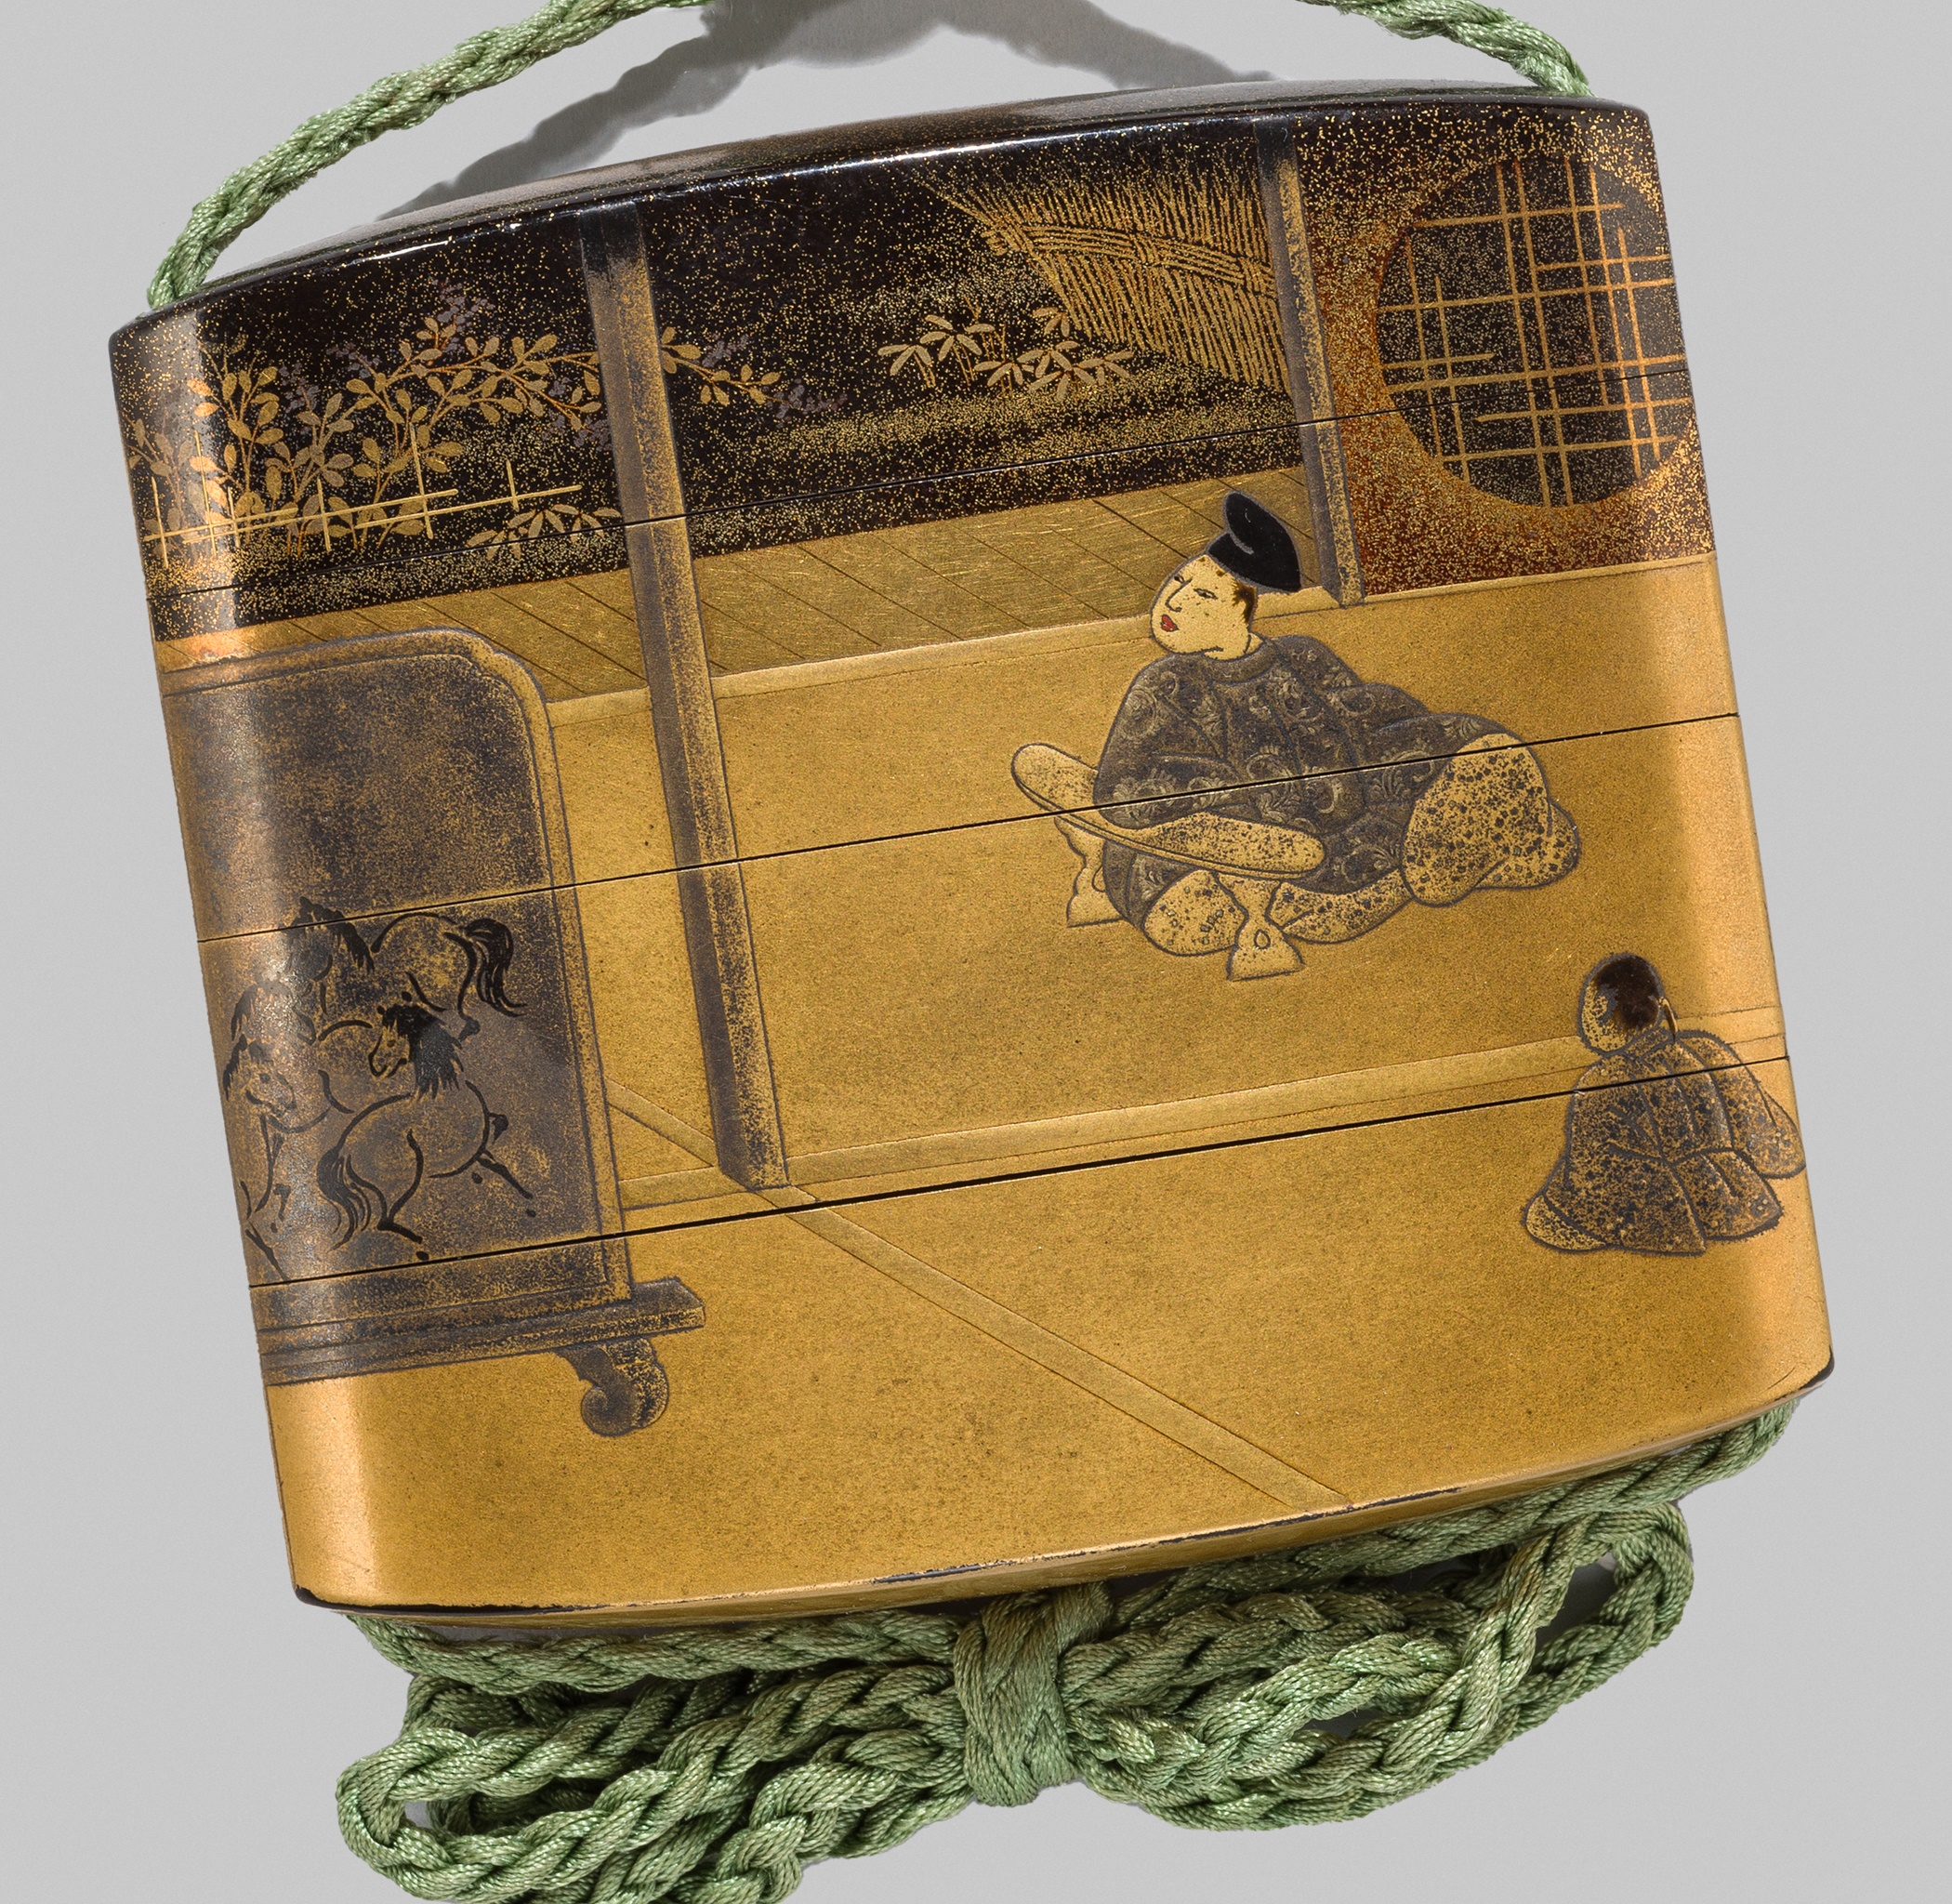 INAGAWA SENRYU: A FINE TOGIDASHI LACQUER THREE-CASE INRO DEPICTING A SCENE FROM THE TALE OF GENJI - Image 5 of 12